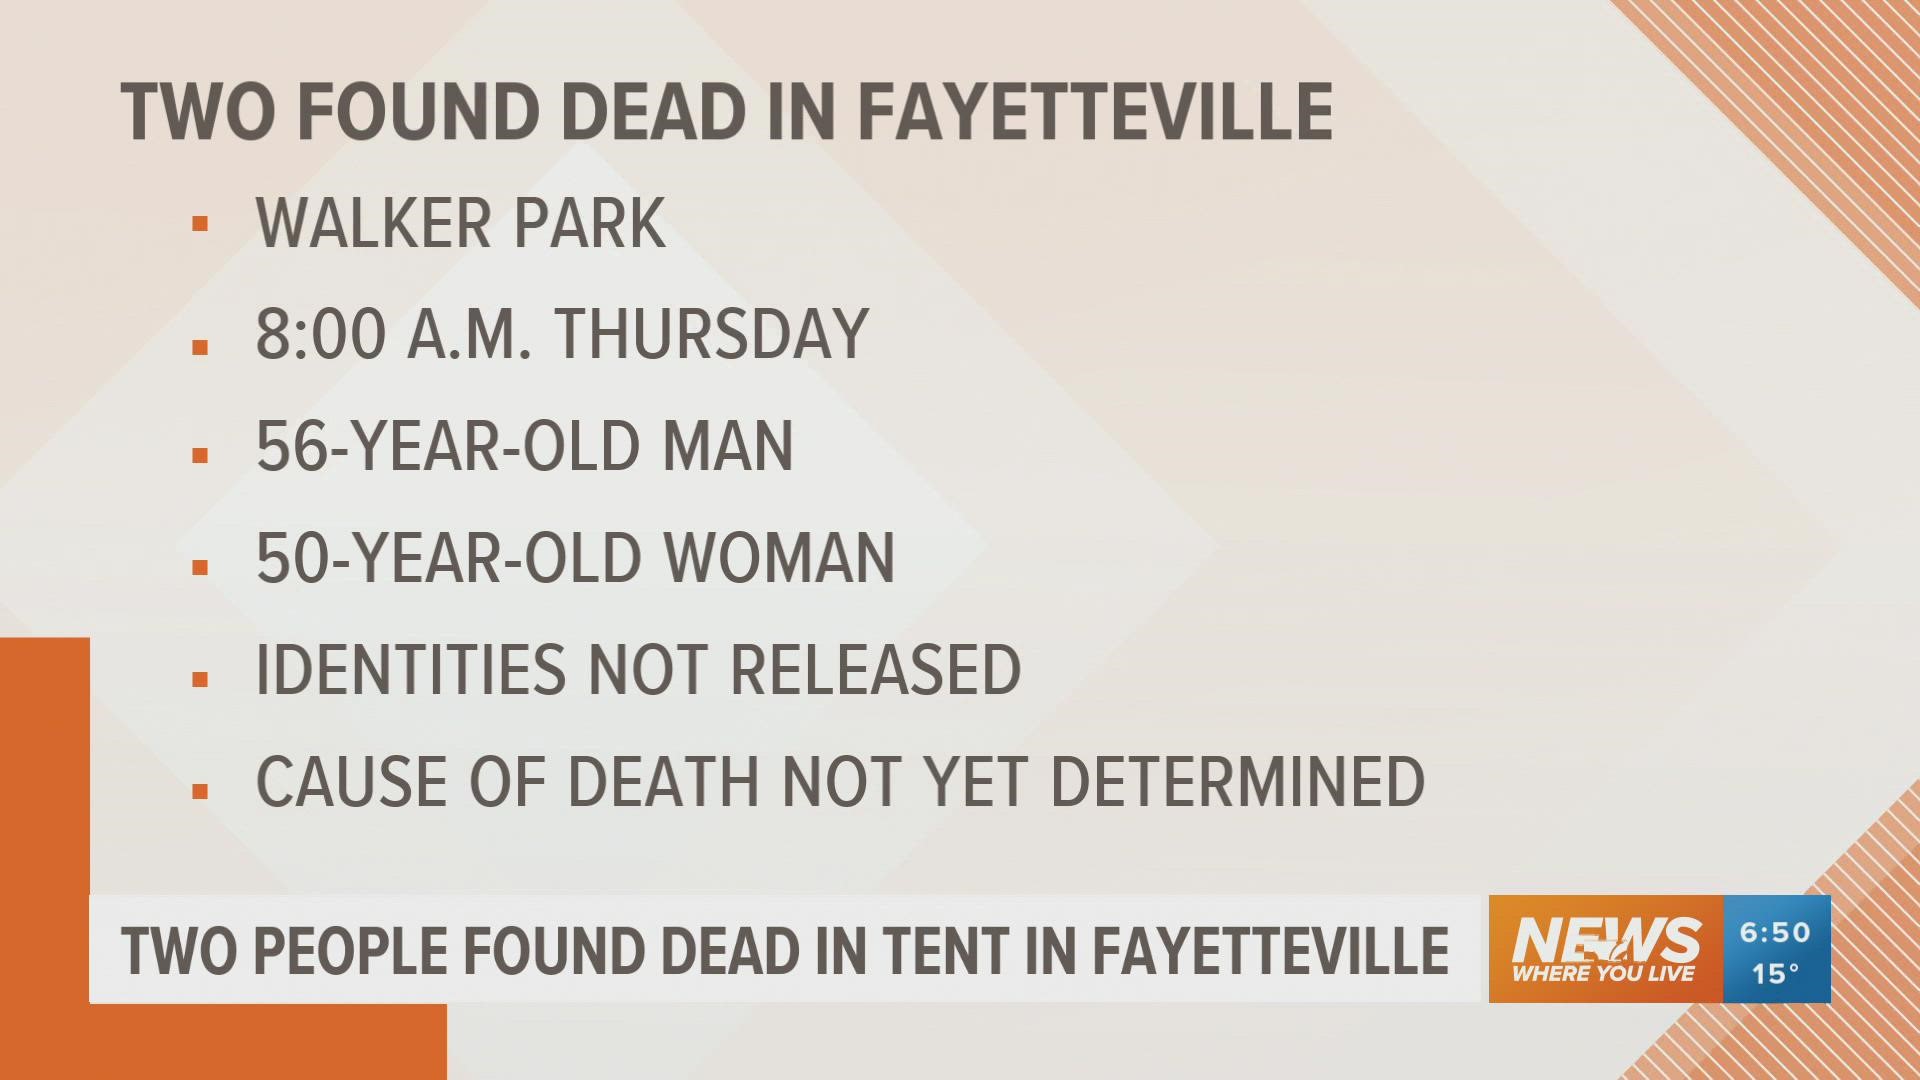 Fayetteville police say they found a man and woman in their 50s dead at Walker Park on Thursday.